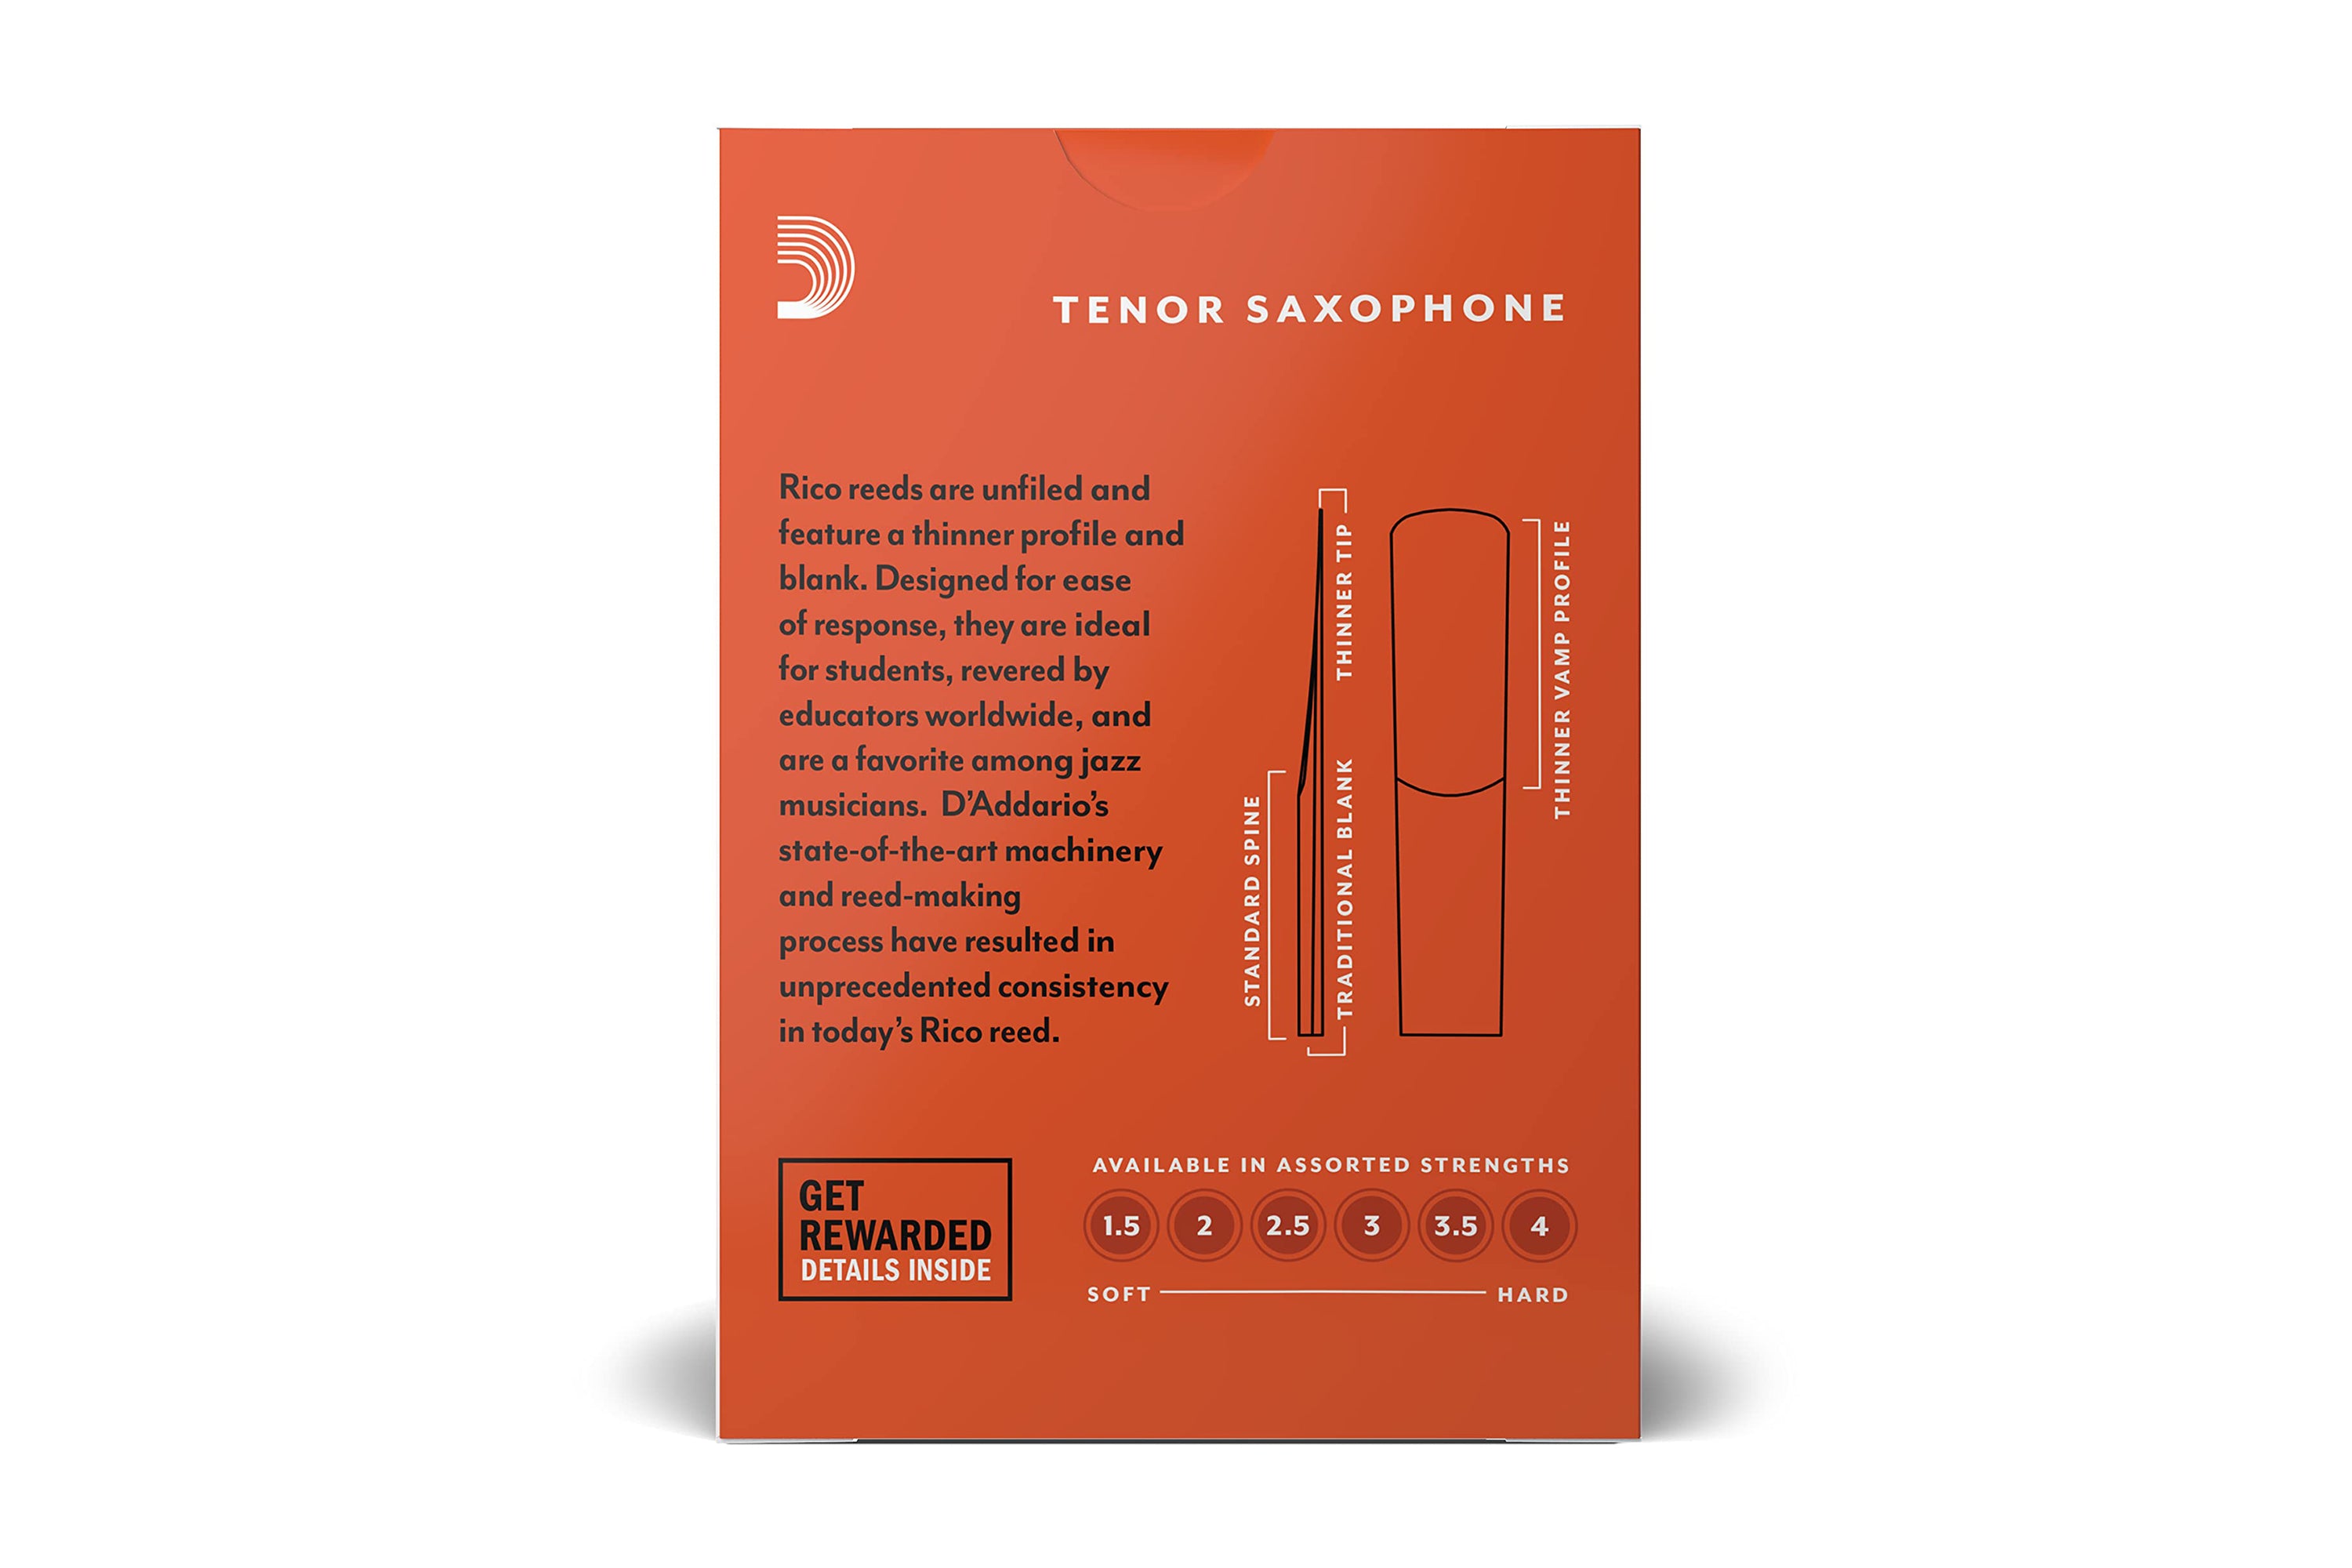 Rico by D'Addario Tenor Saxophone Reeds Strength 2.5 - 10 Pack